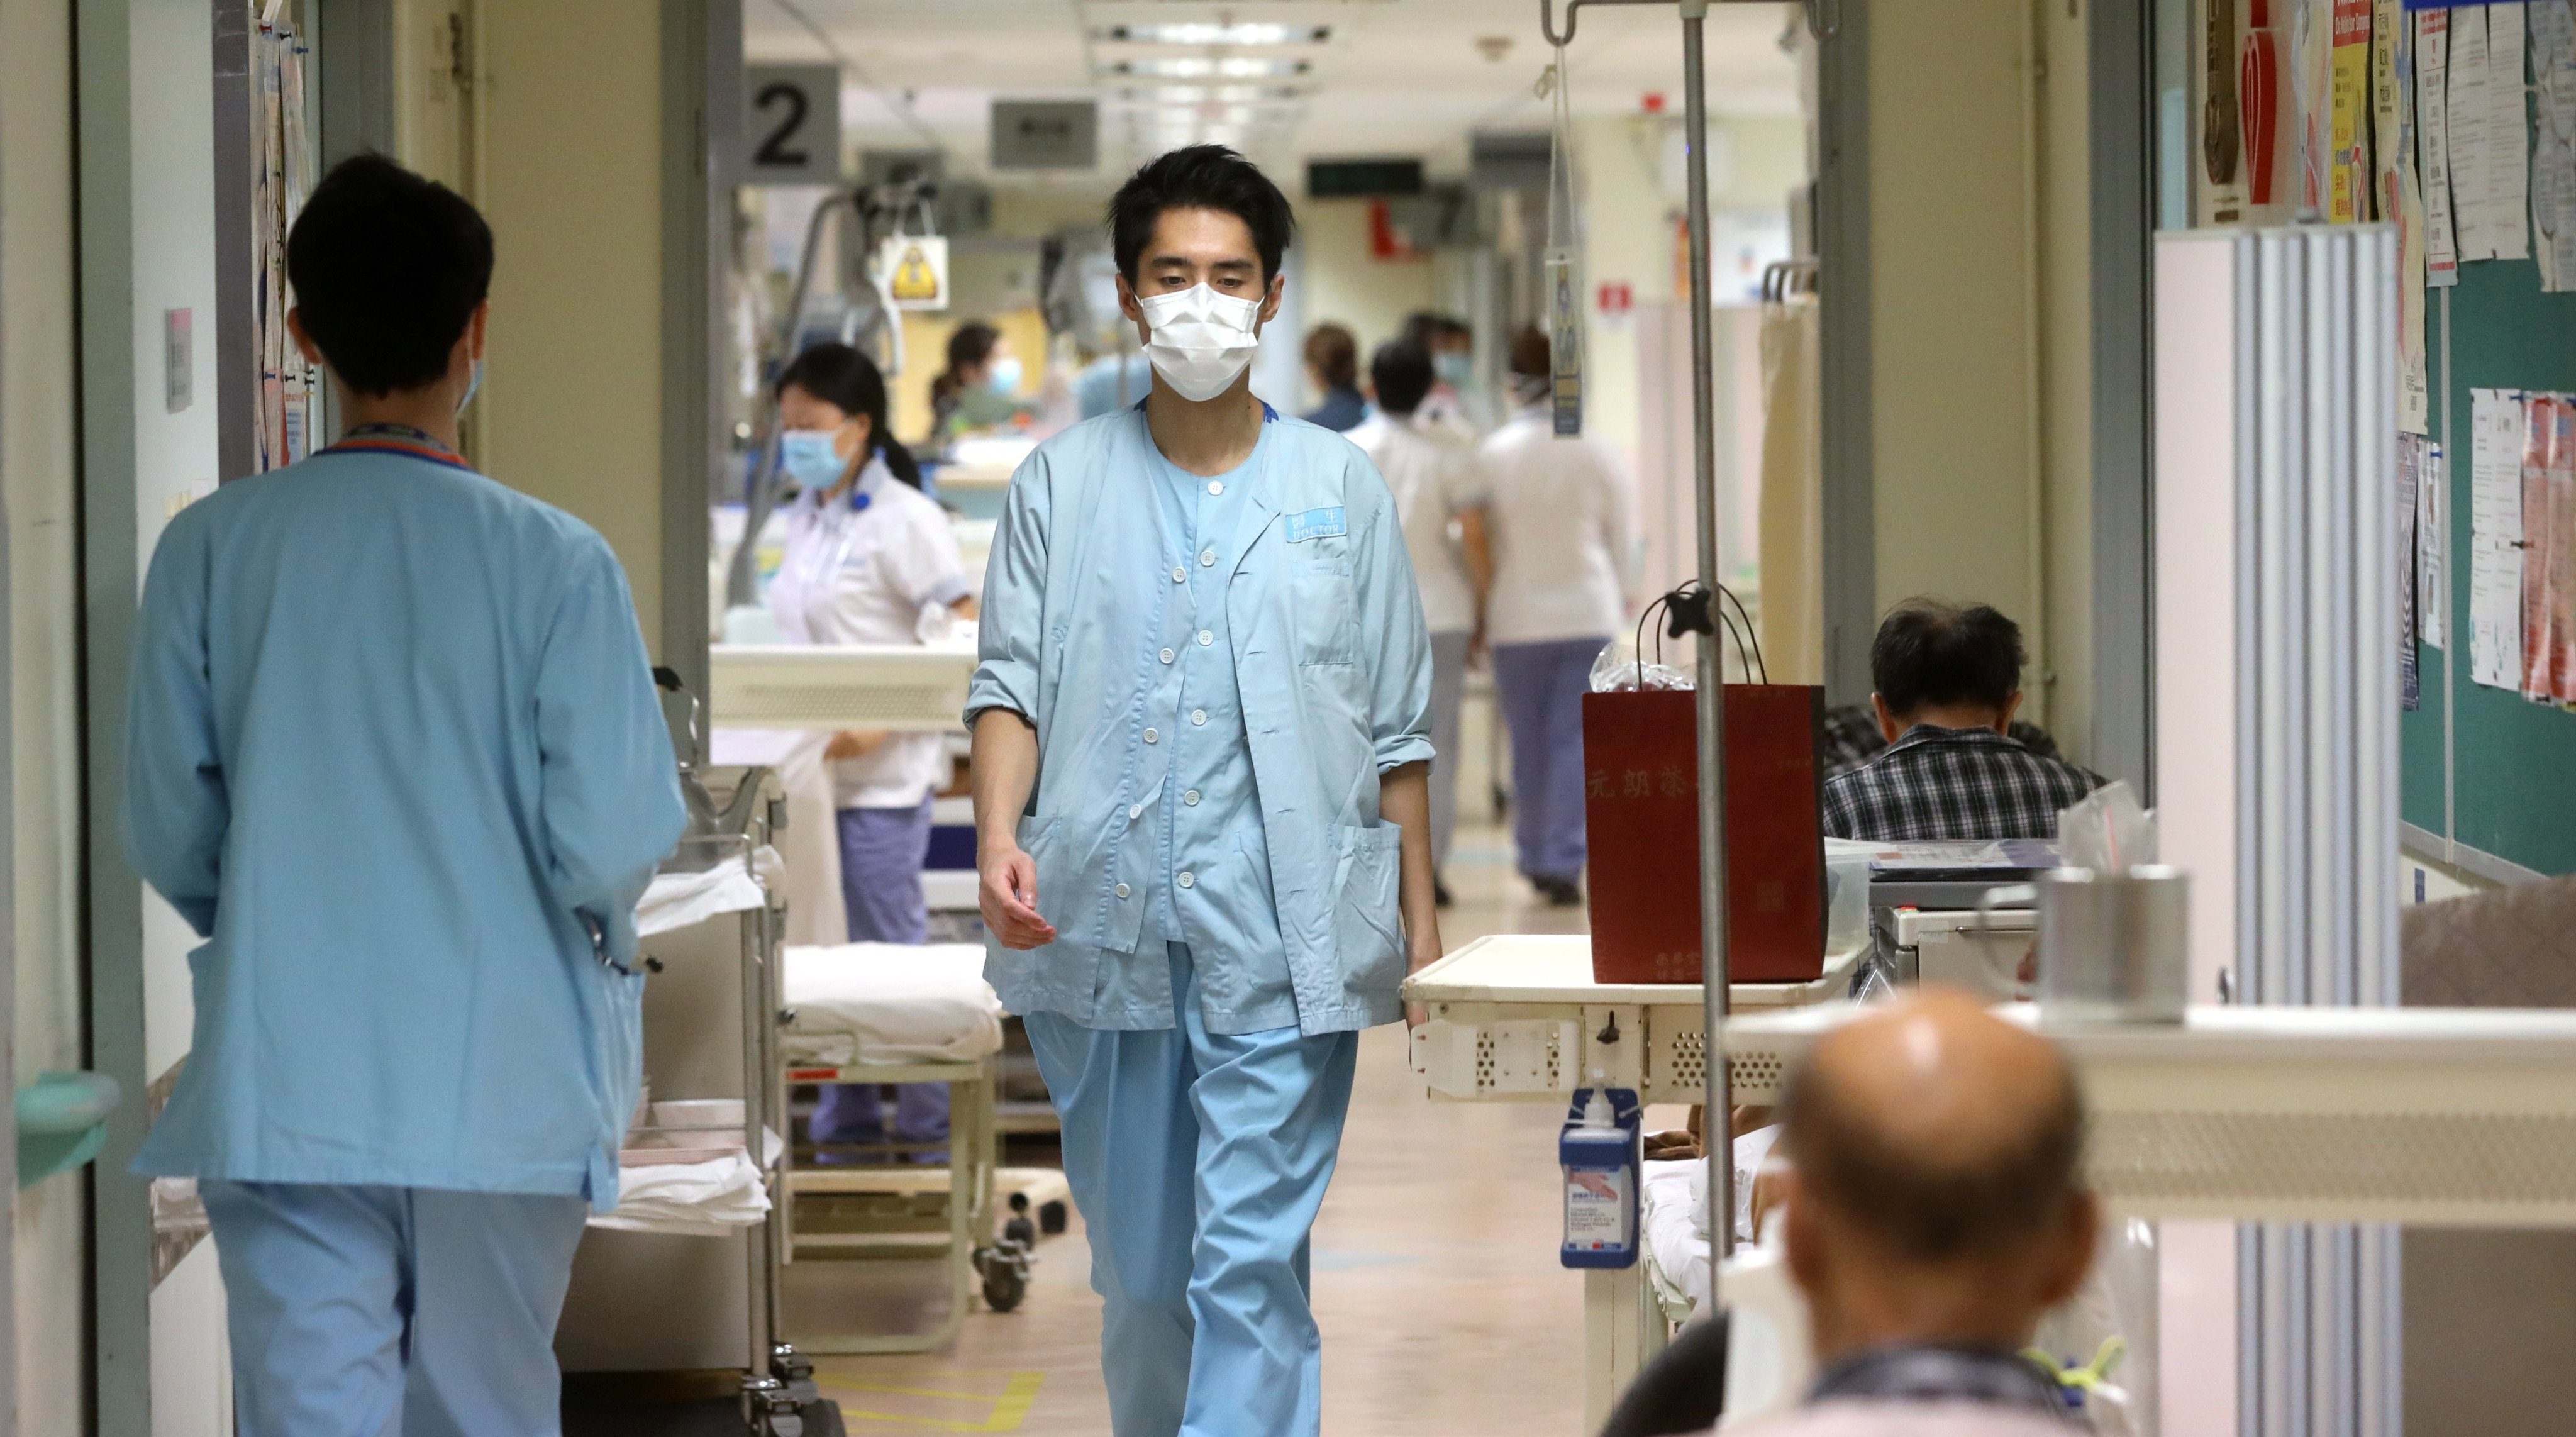 Hong Kong’s public hospitals have unveiled a scheme to hire doctors from the Greater Bay Area. Photo: Sam Tsang